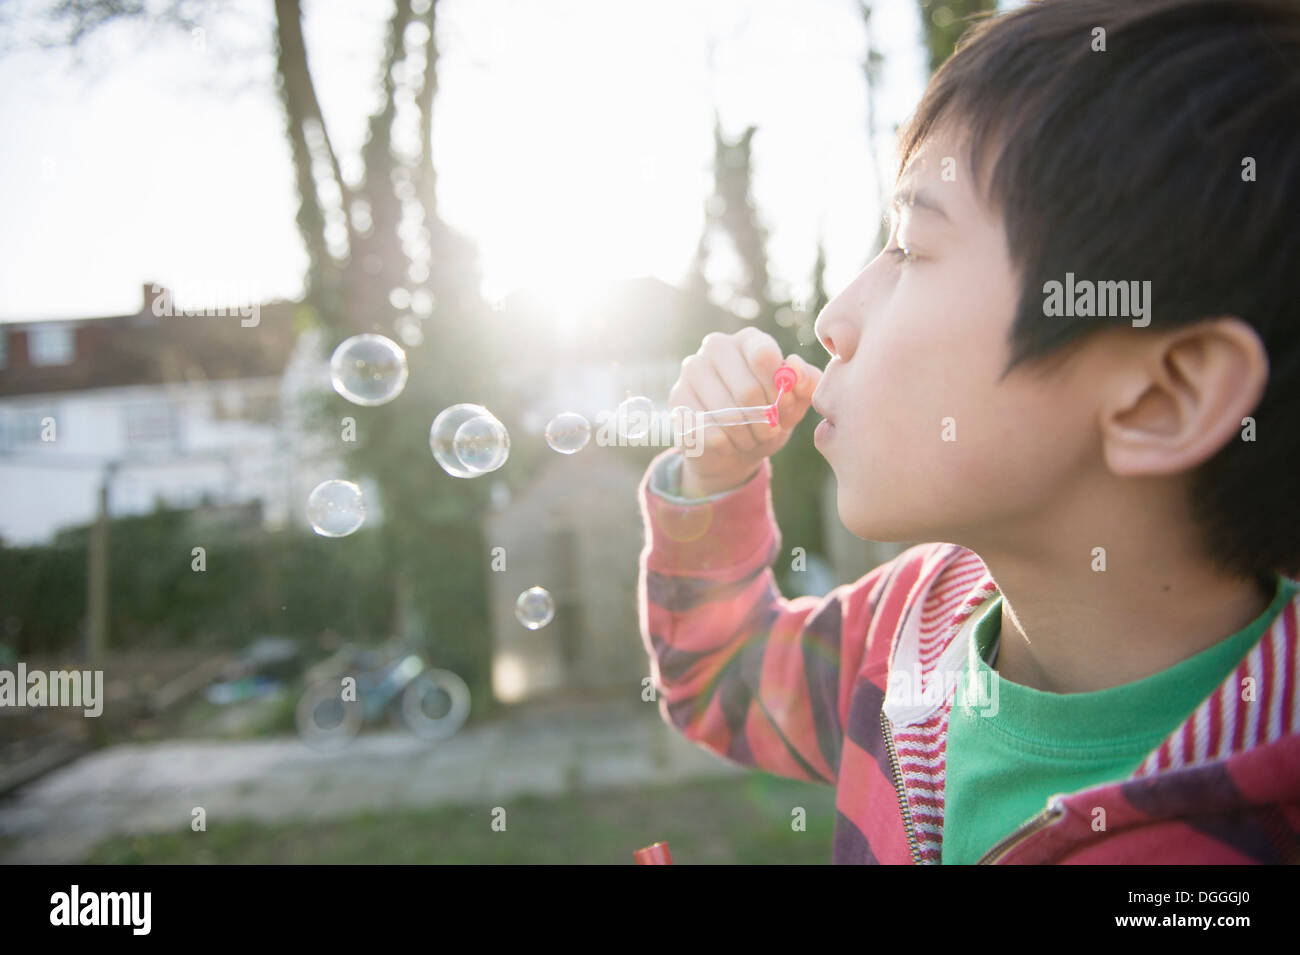 Boy blowing bubbles with wand, close up Stock Photo